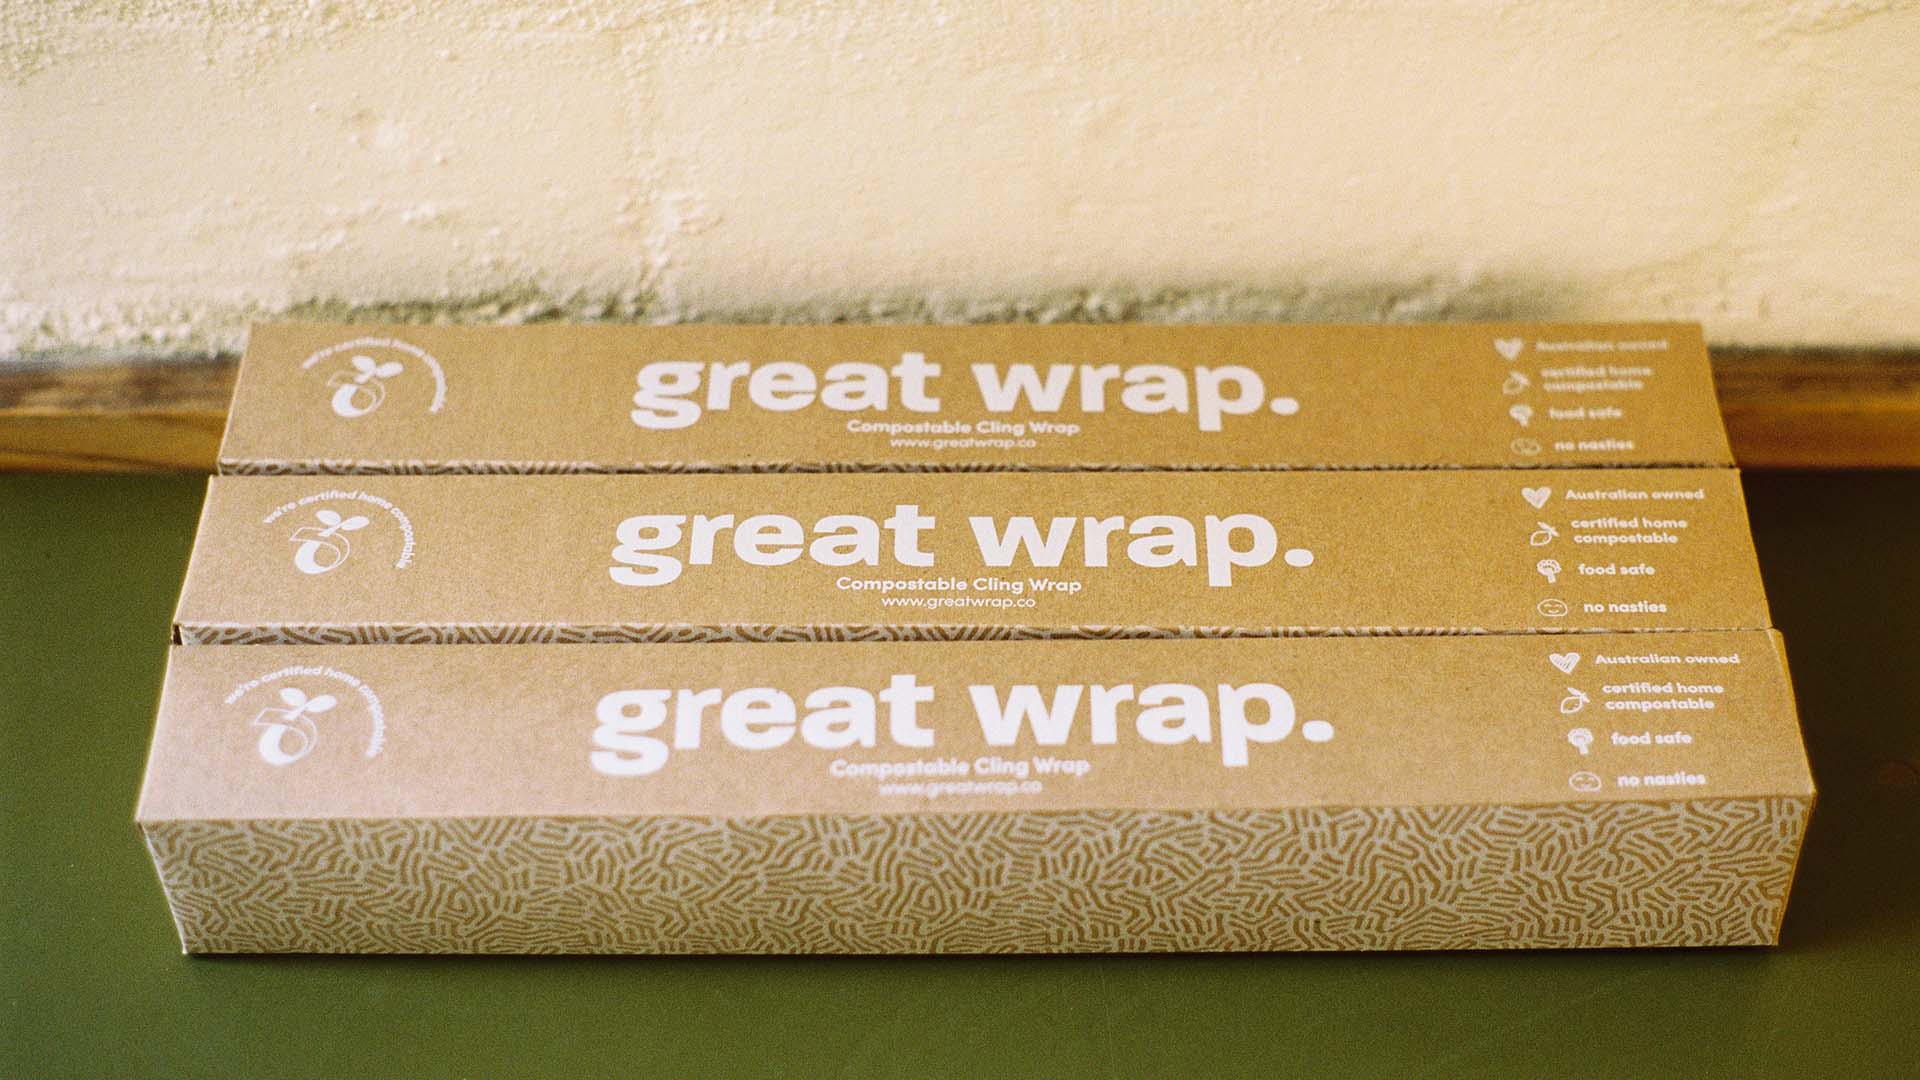 Great Wrap Is the New Alternative to Cling Wrap You Can Throw In Your Compost Bin